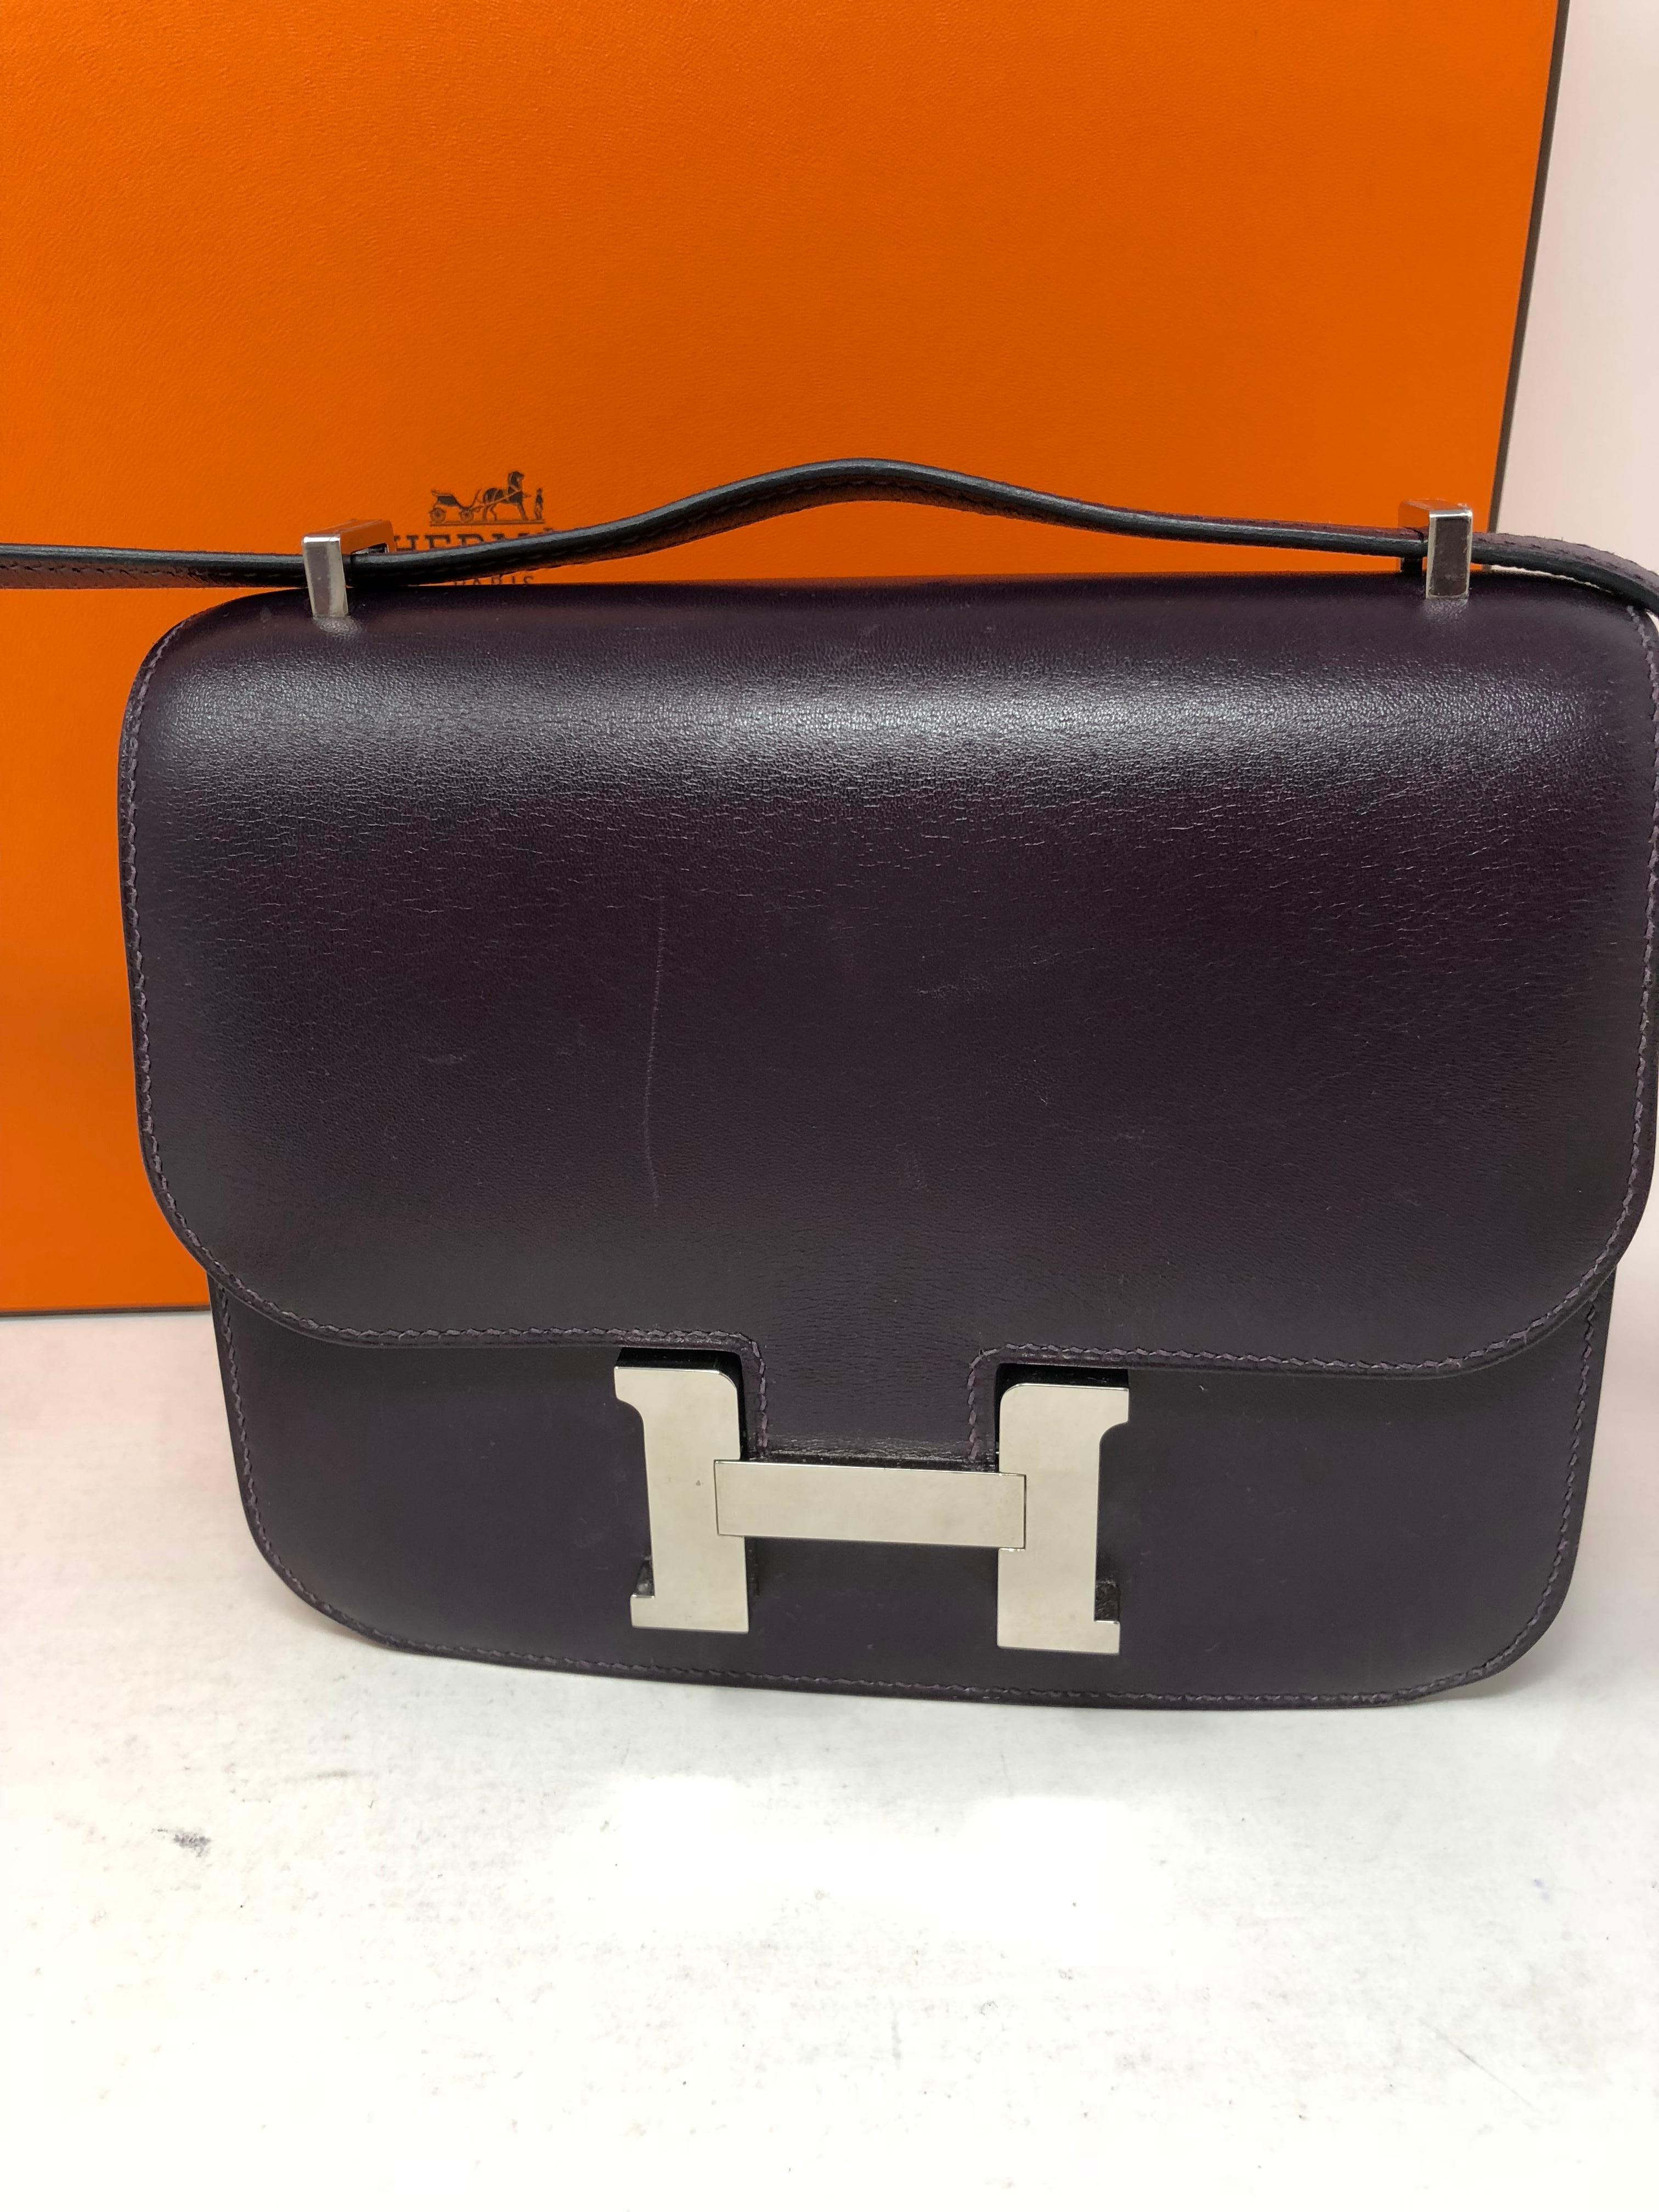 Hermes Constance Purple Mini 18 Bag. Dark purple color swift leather. Palladium hardware. Rare hard to find Constance especially in this mini size. Color is rare too. Good condition. Light surface scratches. Bag can worn longer or doubled.